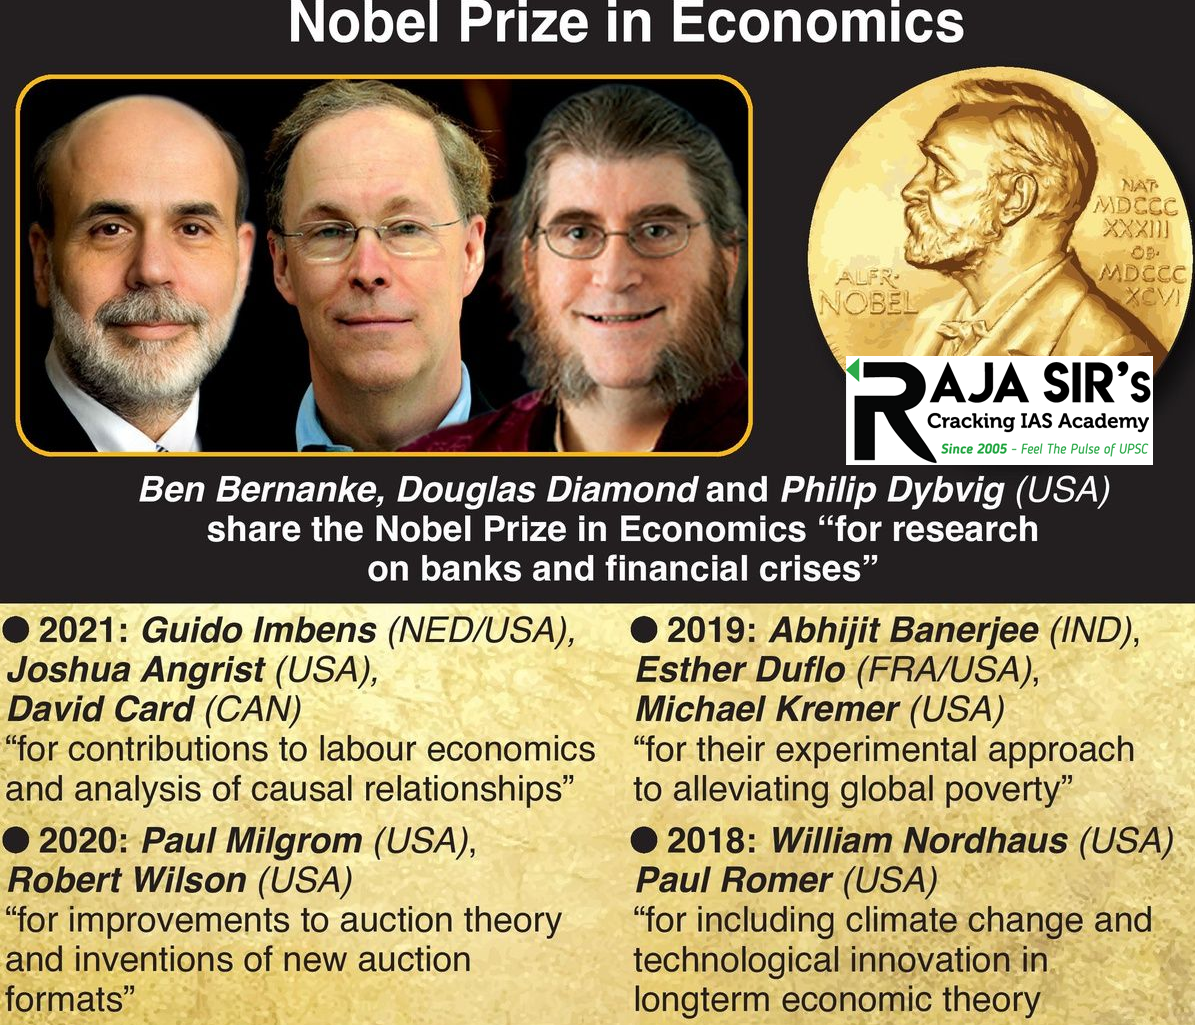 For significantly improving “our understanding of the role of banks in the economy, particularly during financial crises,” the Sveriges Riksbank Prize in Economic Sciences for 2022 was awarded on 10 October 2022 to three American economists: Ben S Bernanke, Douglas W Diamond and Philip H Dybvi.